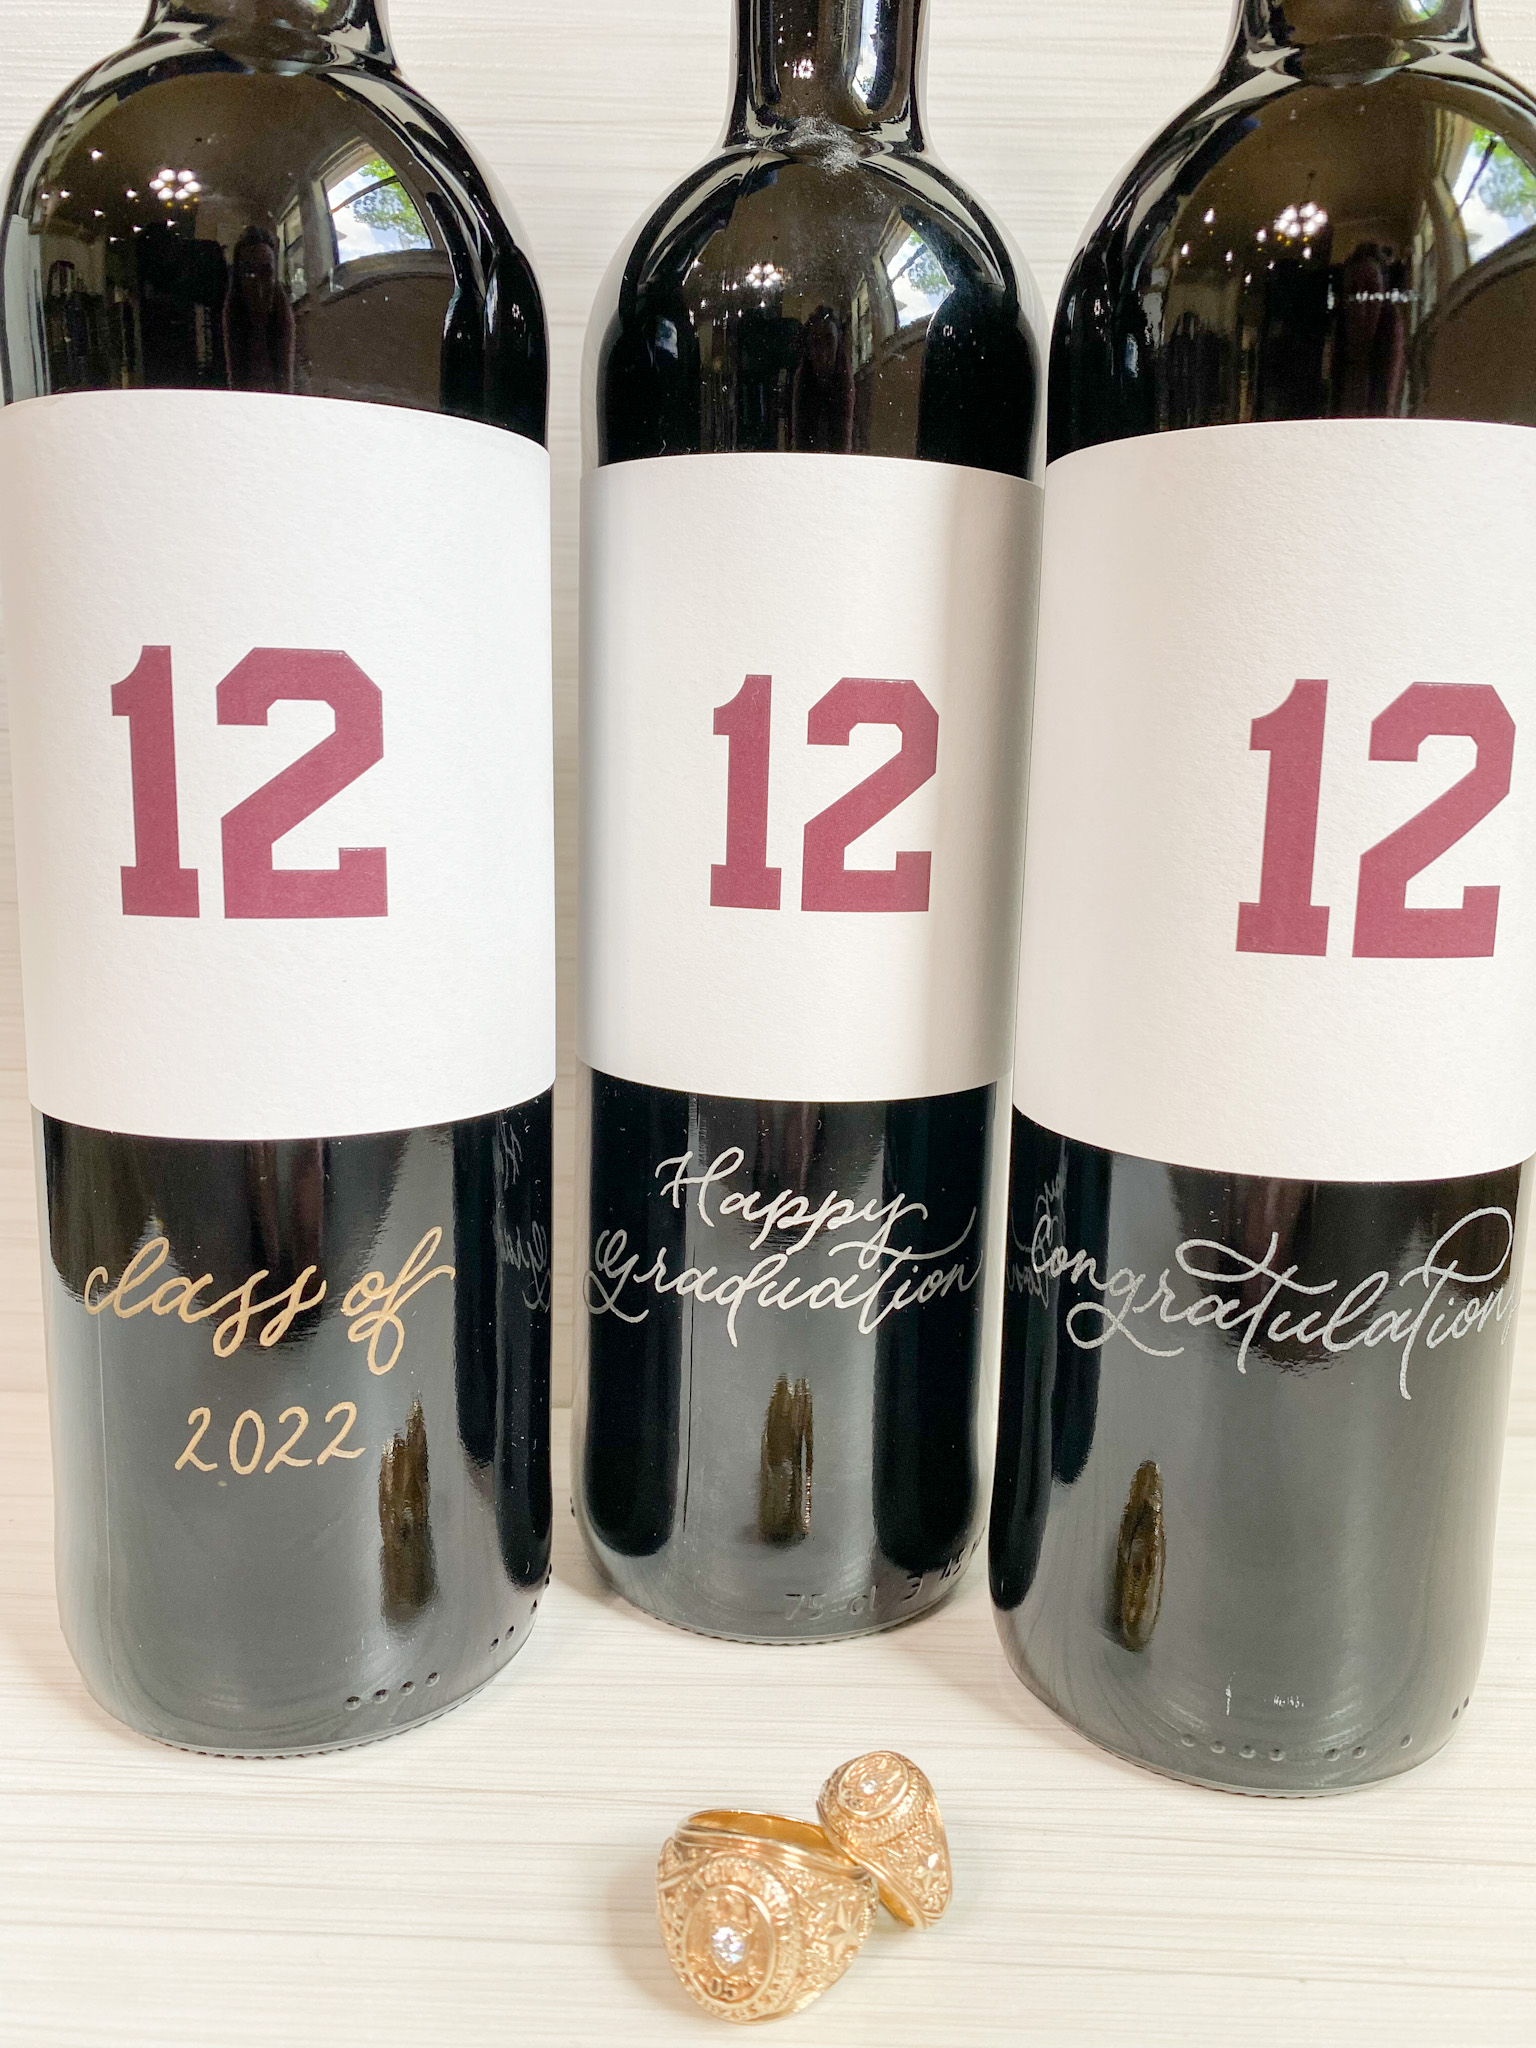 Southern Glazer's Brand Activation Wine Bottle Engraving at H-E-B